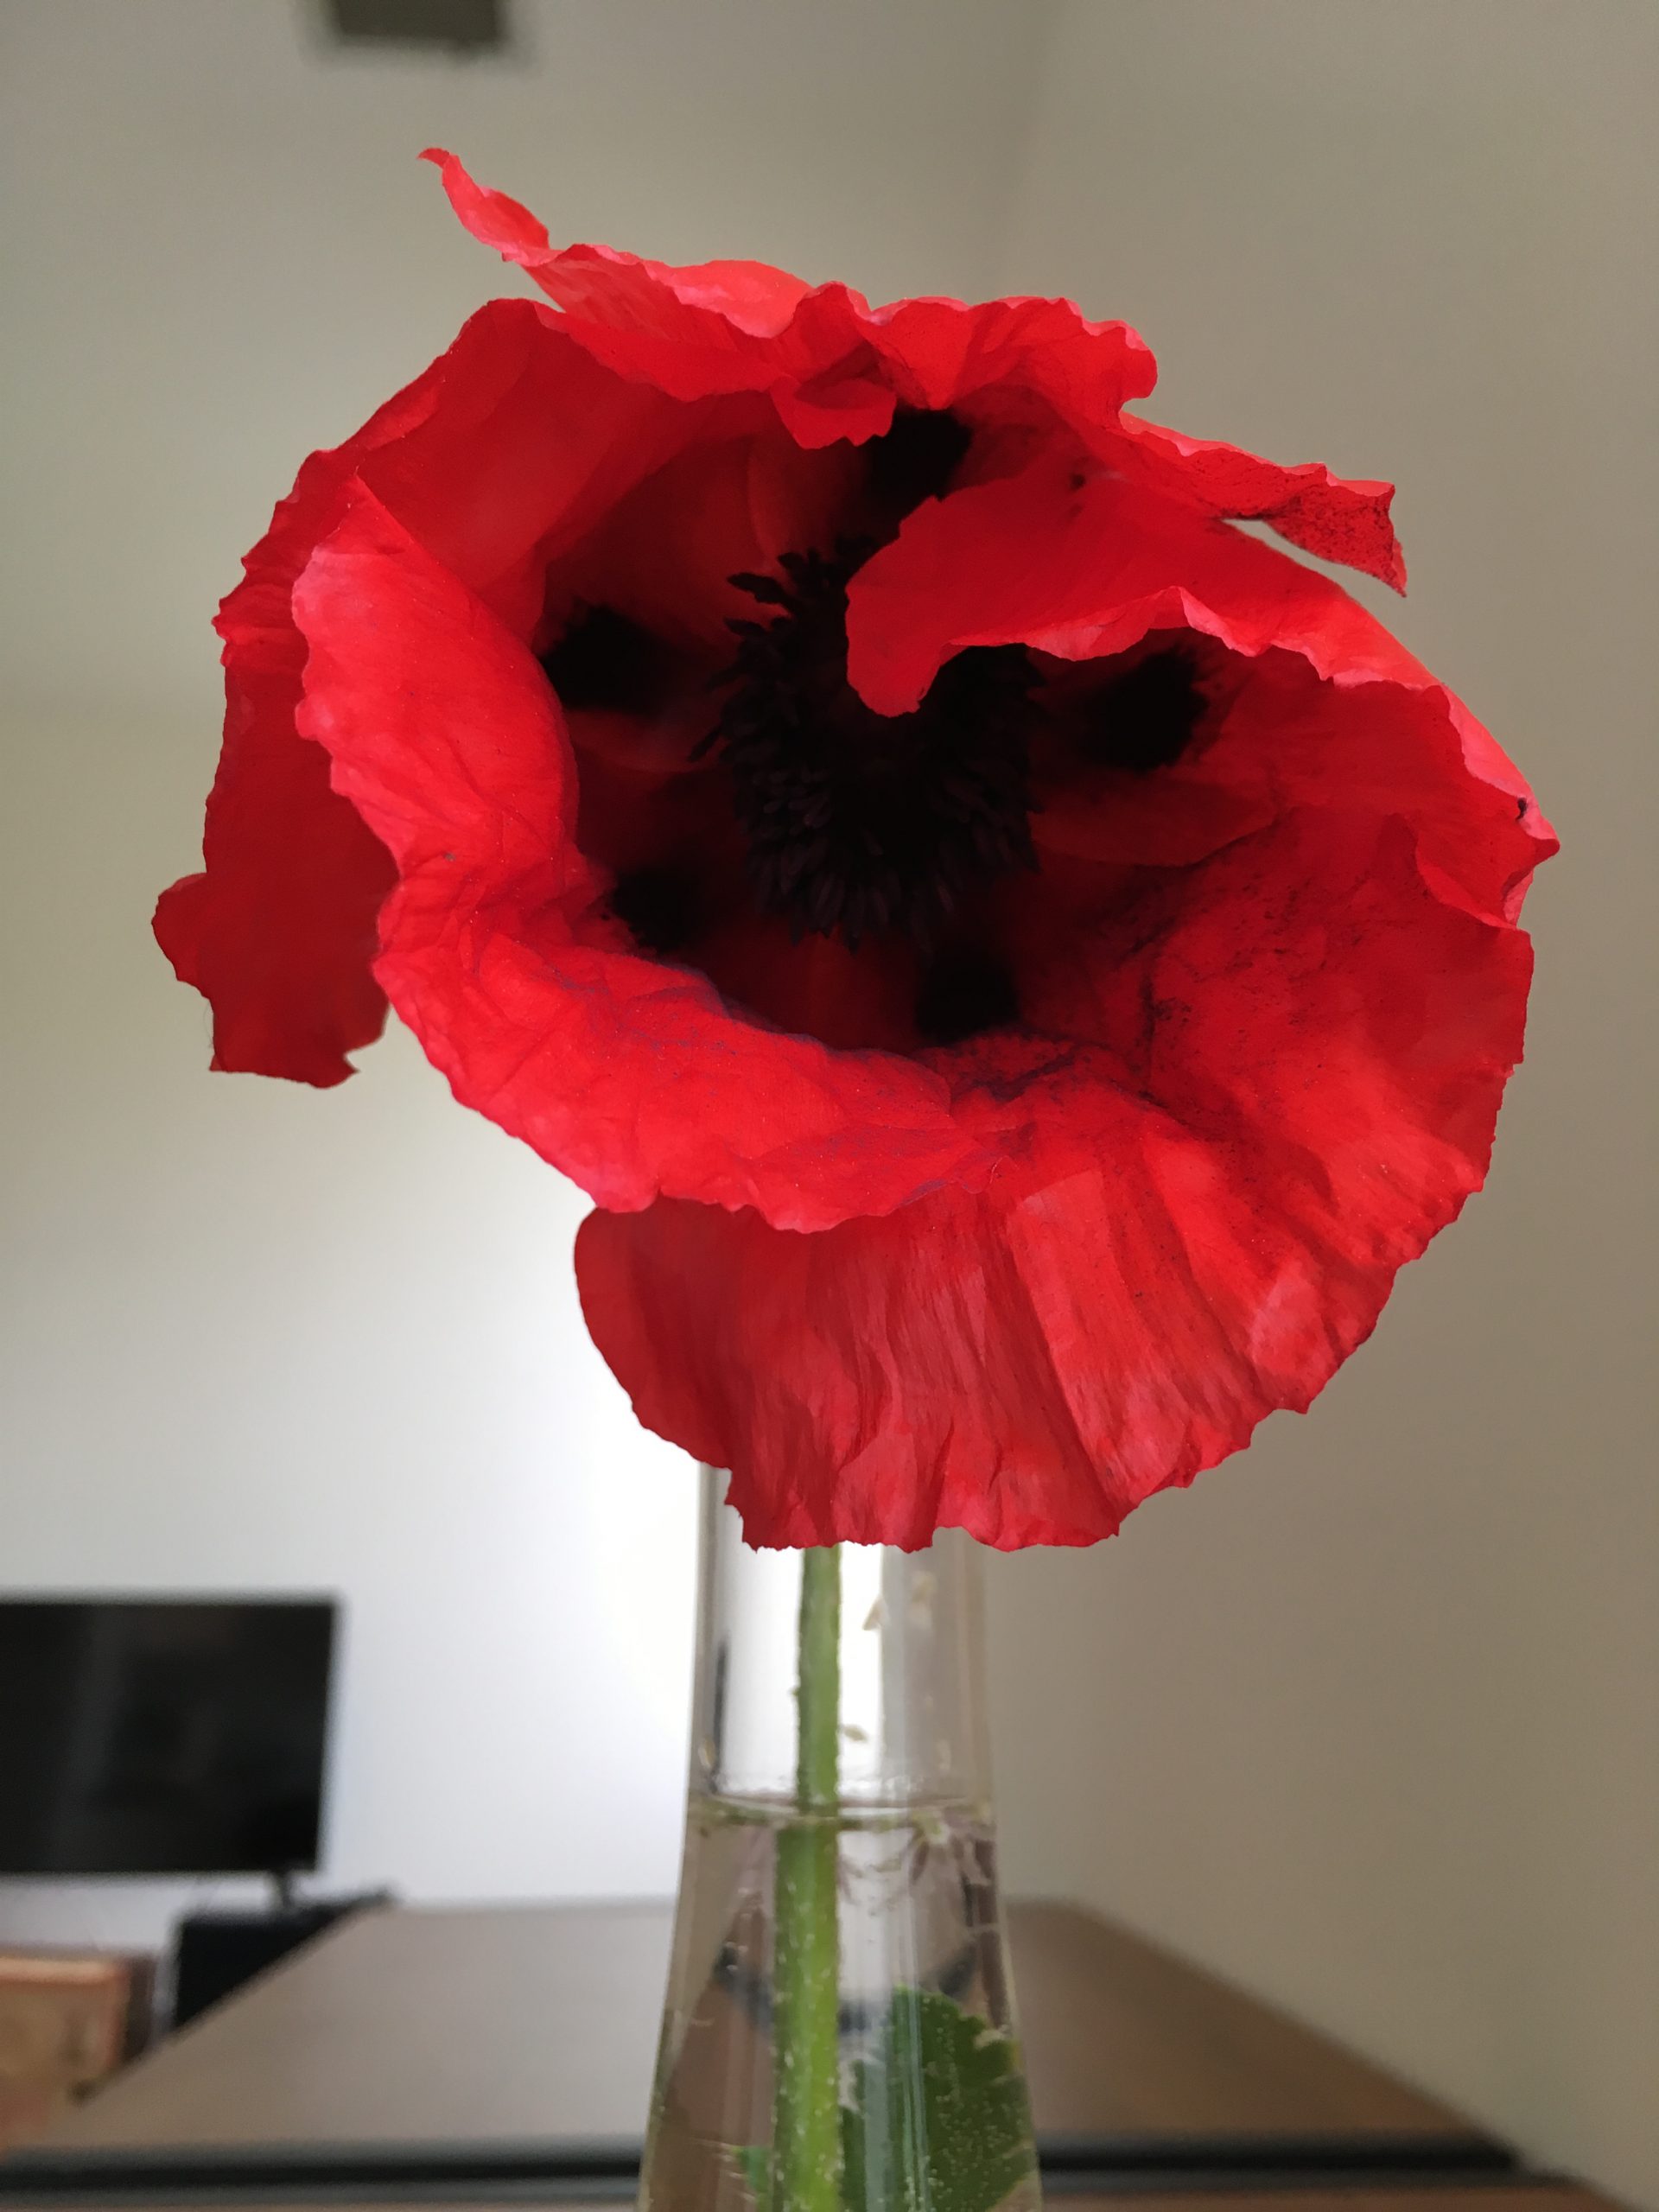 red poppy in a vase indoors